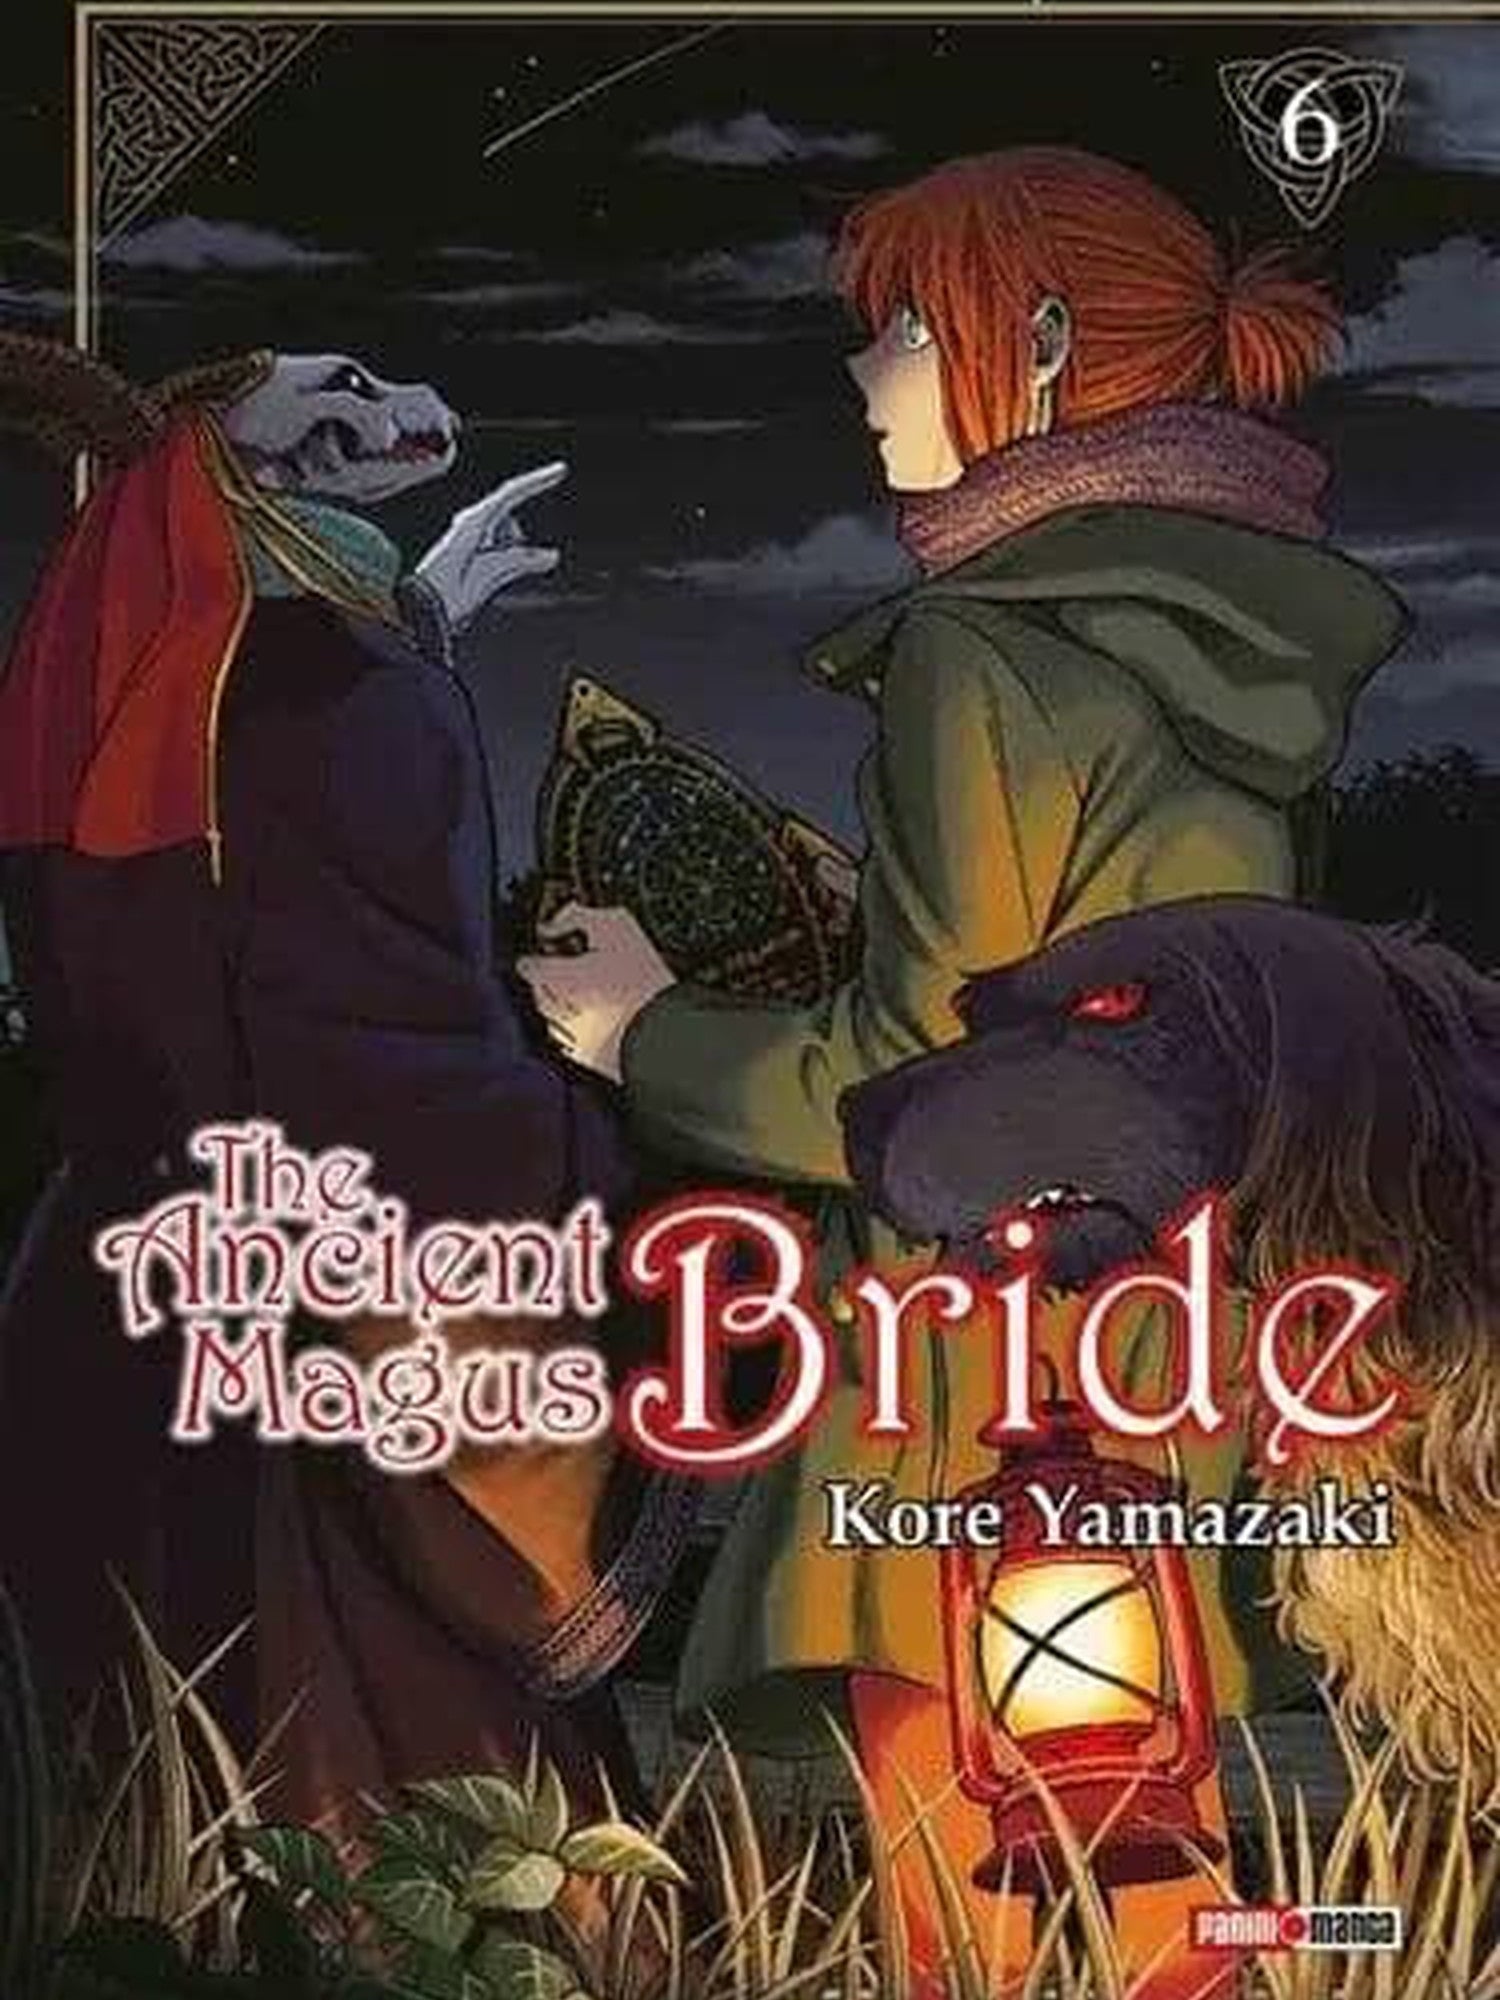 The Ancient Magus Bride #6